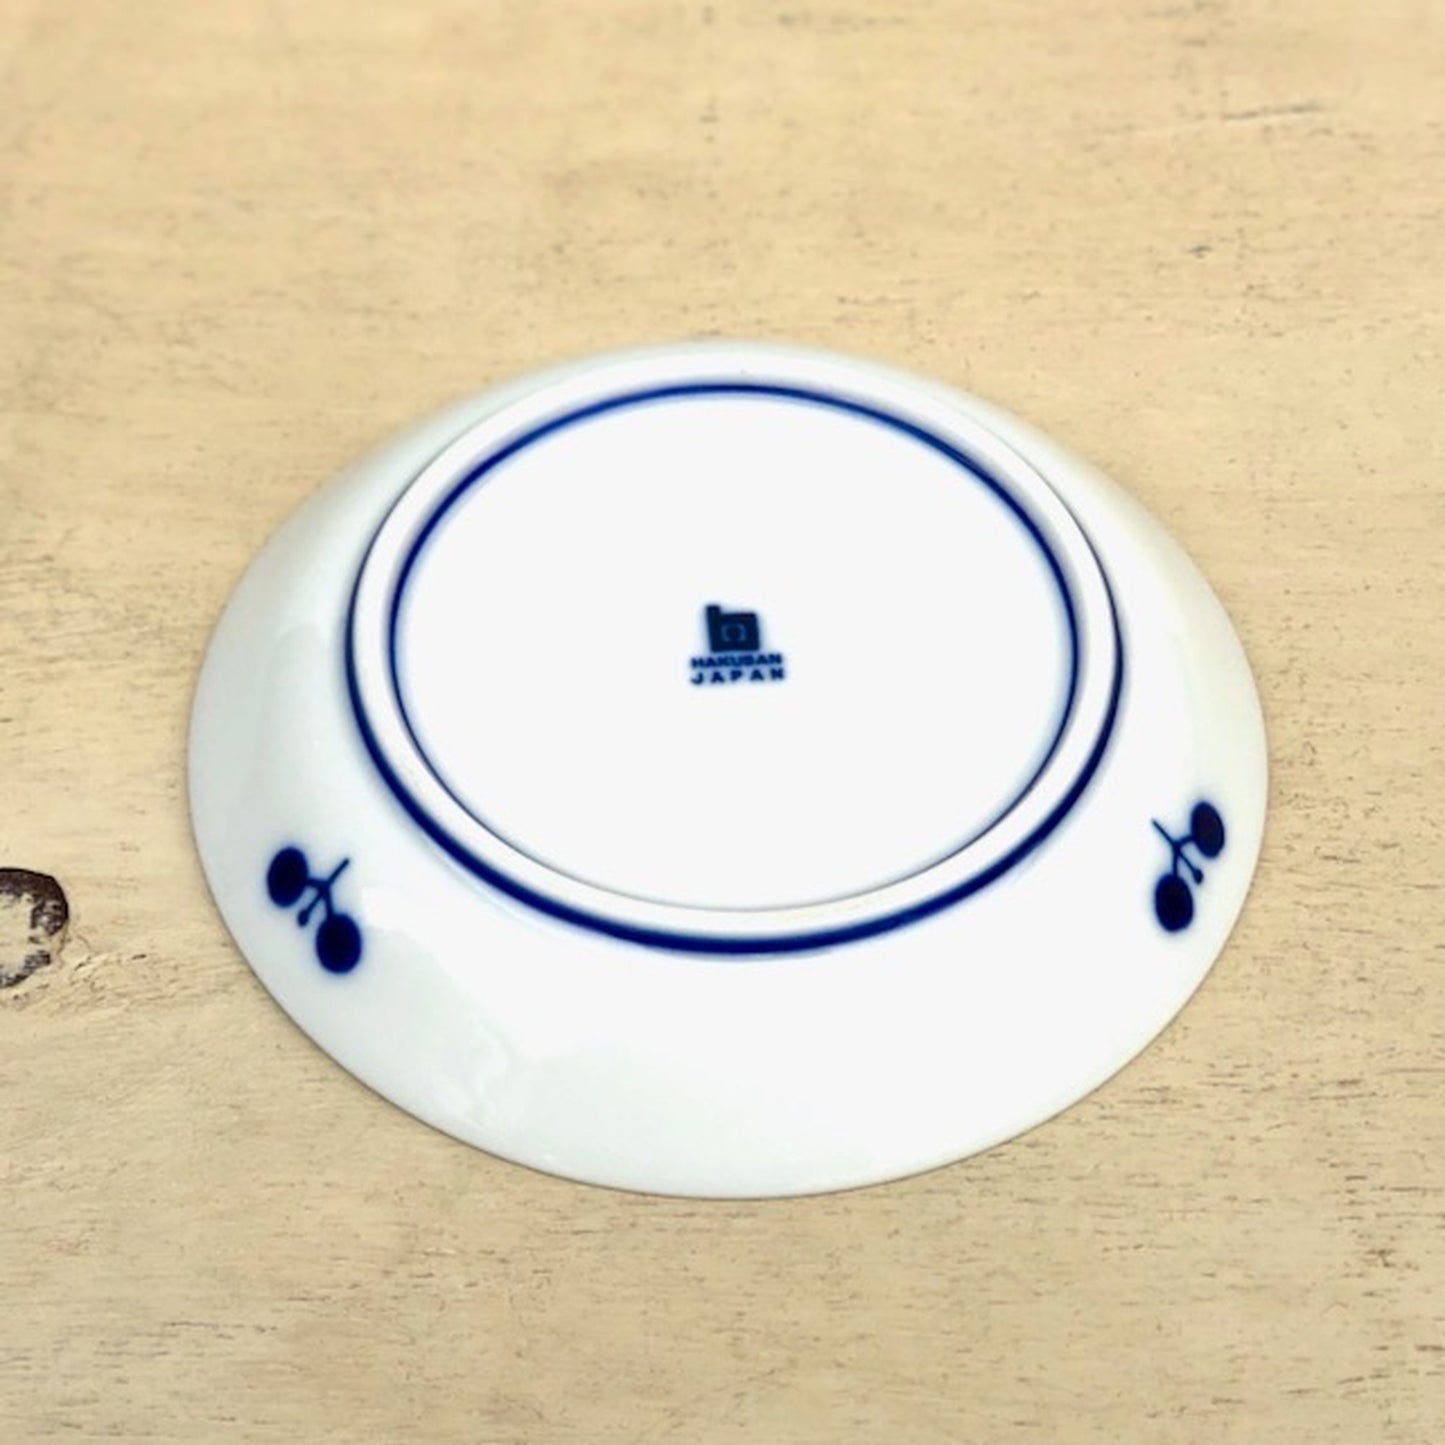 [Hasami ware] [Hakusan pottery] [Bloom] [Plate] [Wreath] [SS] [Sold individually] Scandinavian style tableware Small plate Fashionable cute